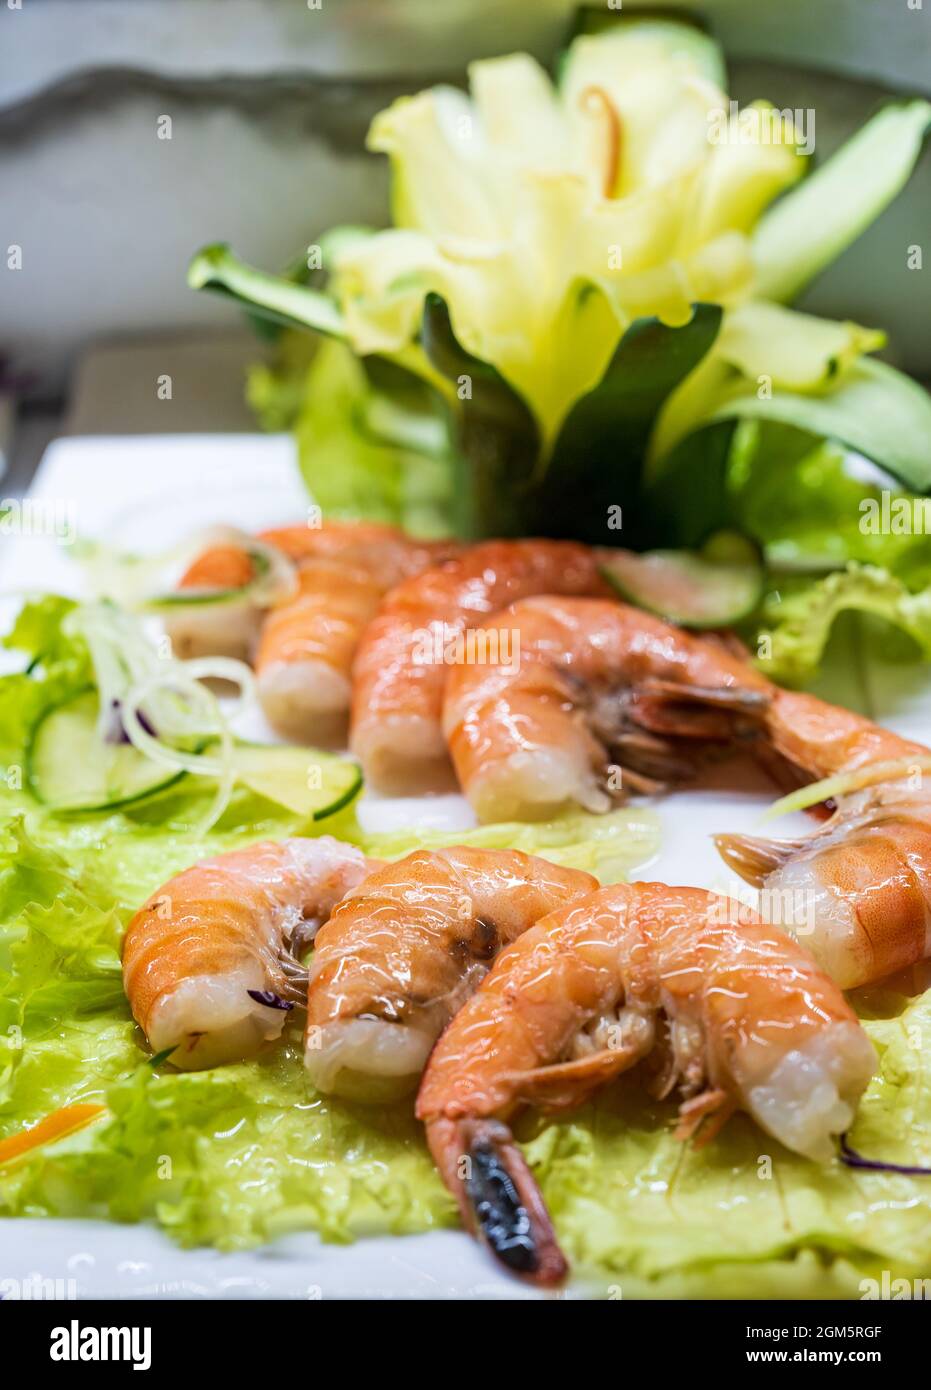 Delicious Shrimps Garnished with Salad and Vegetables. Stock Photo